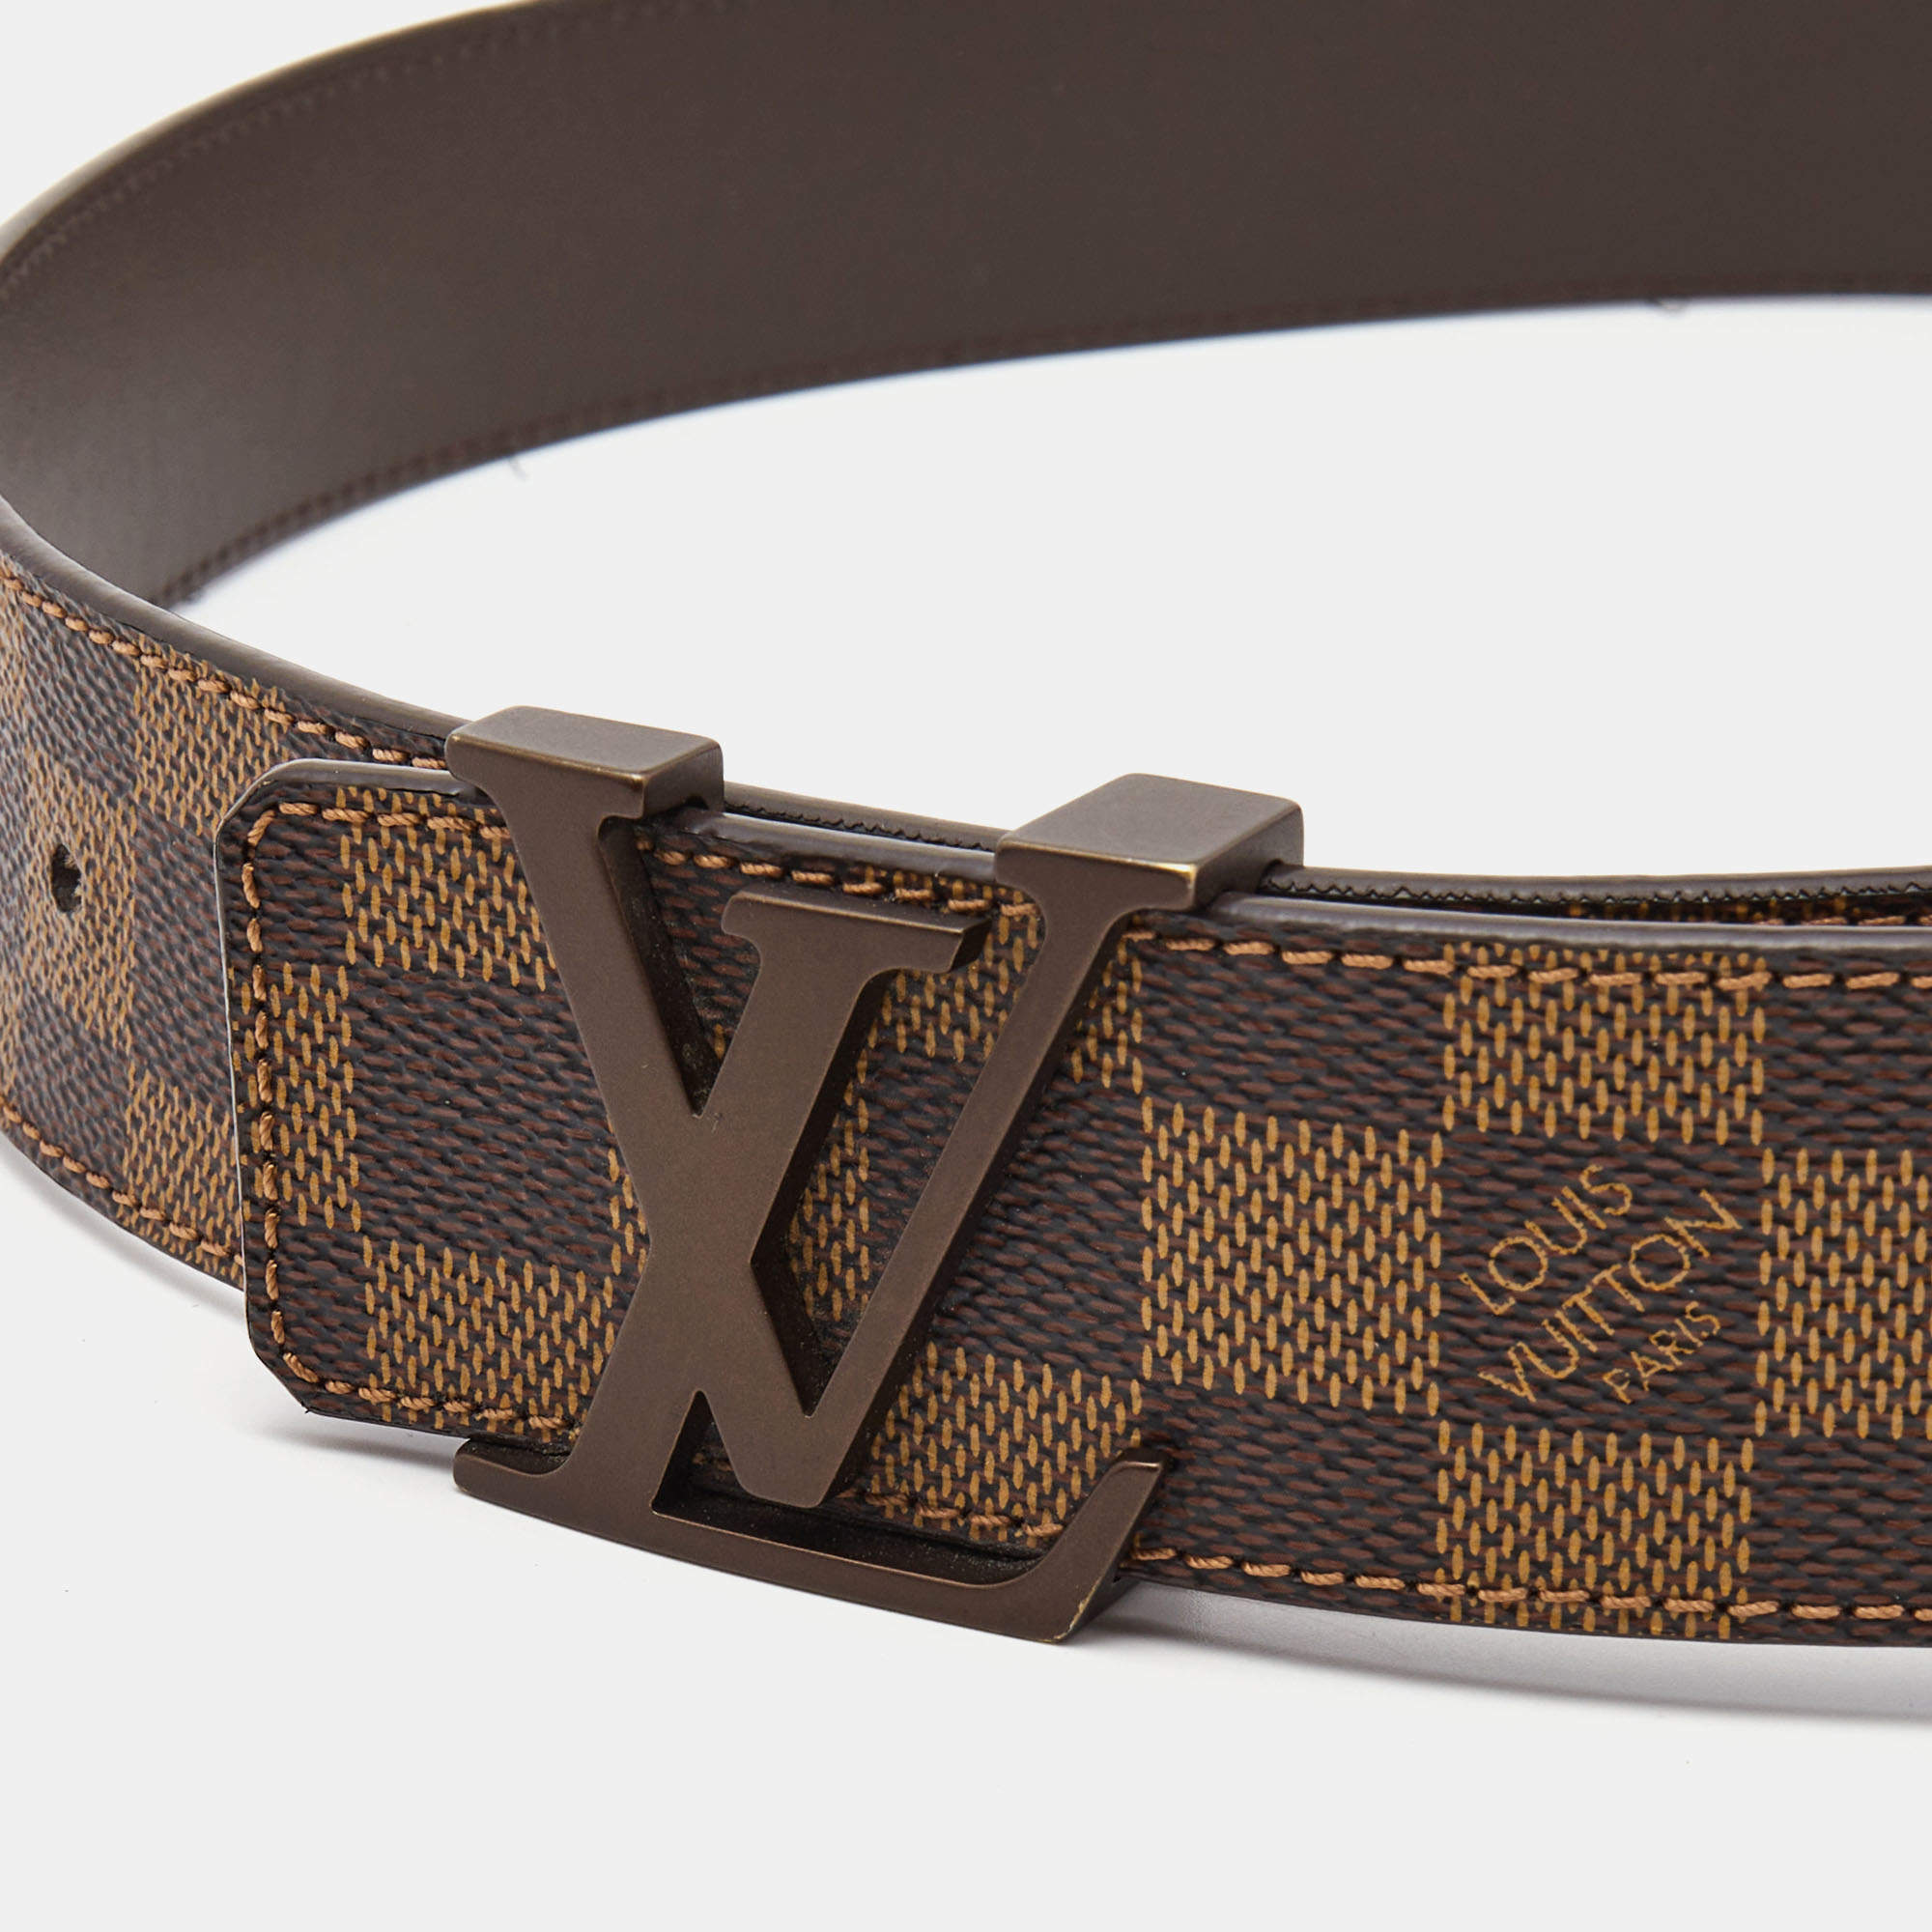 Initiales leather belt Louis Vuitton Brown size 90 cm in Leather - 29499639